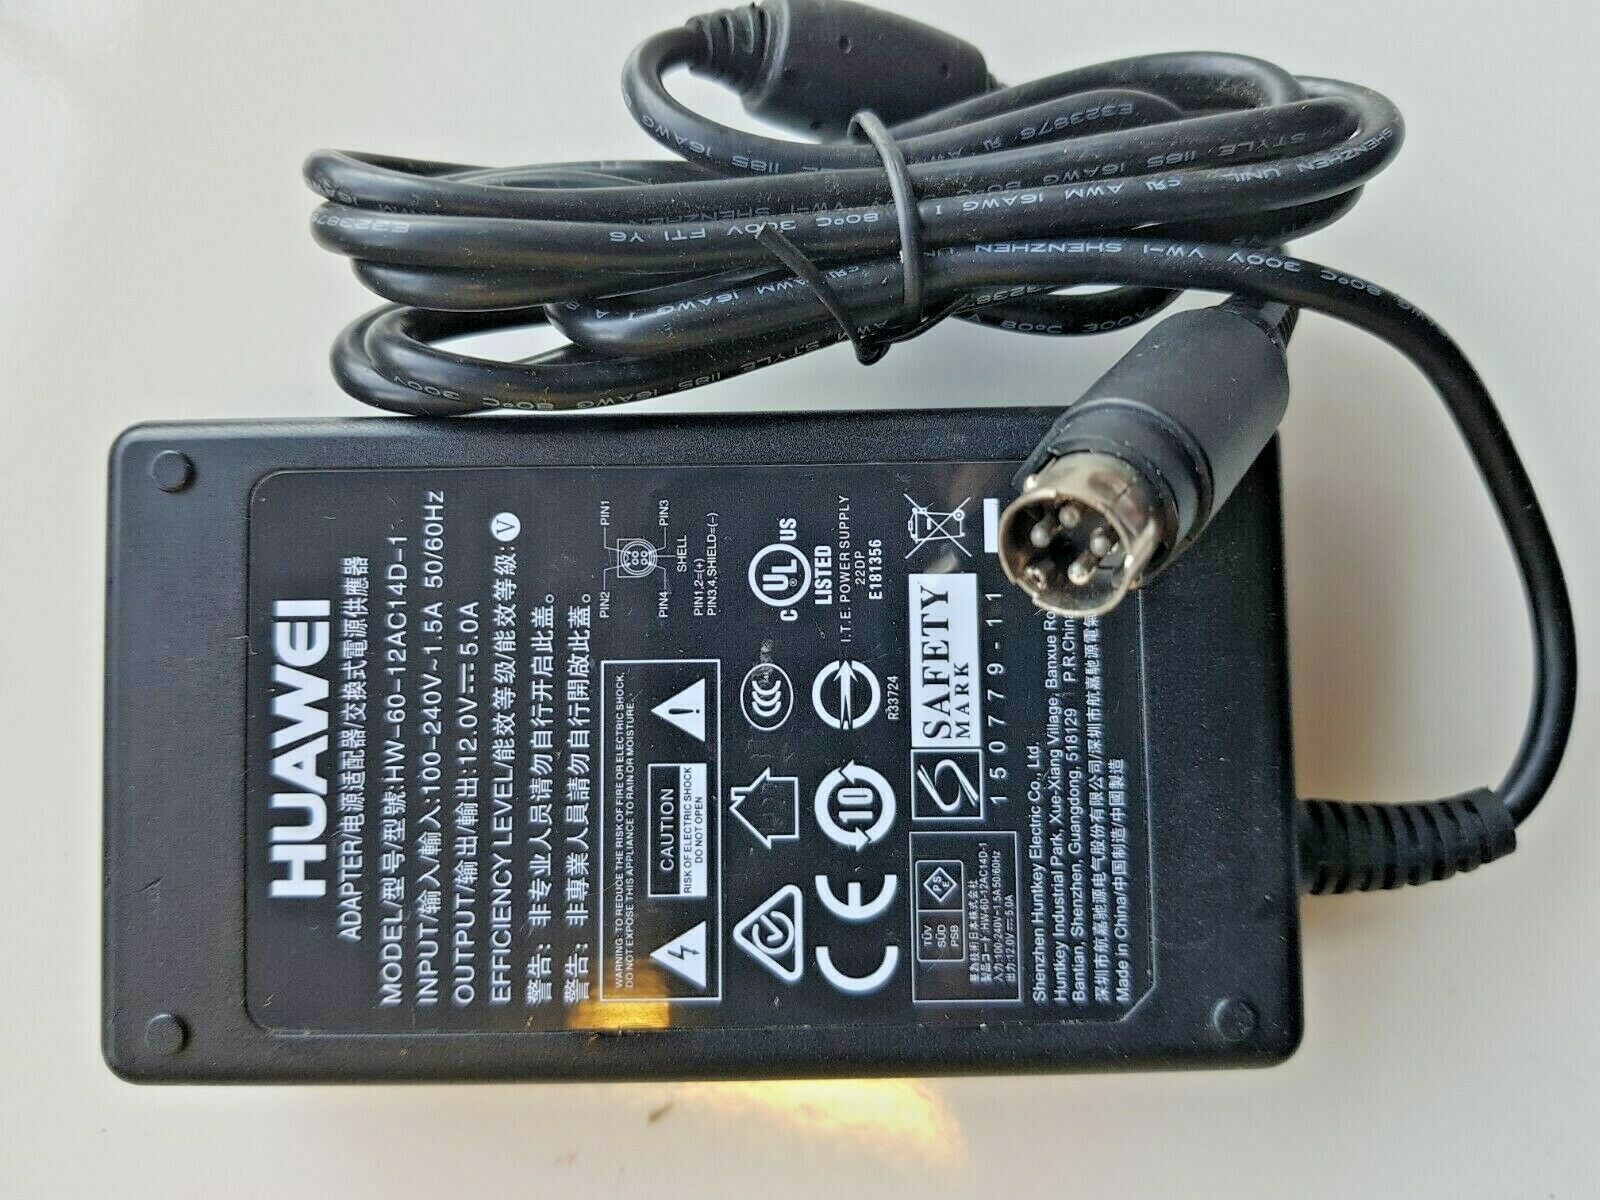 *Brand NEW* HUAWEI HW-60-12AC14D-1 4 PIN DIN 4 ROUTER 12V 5A AC Adapter Power Supply